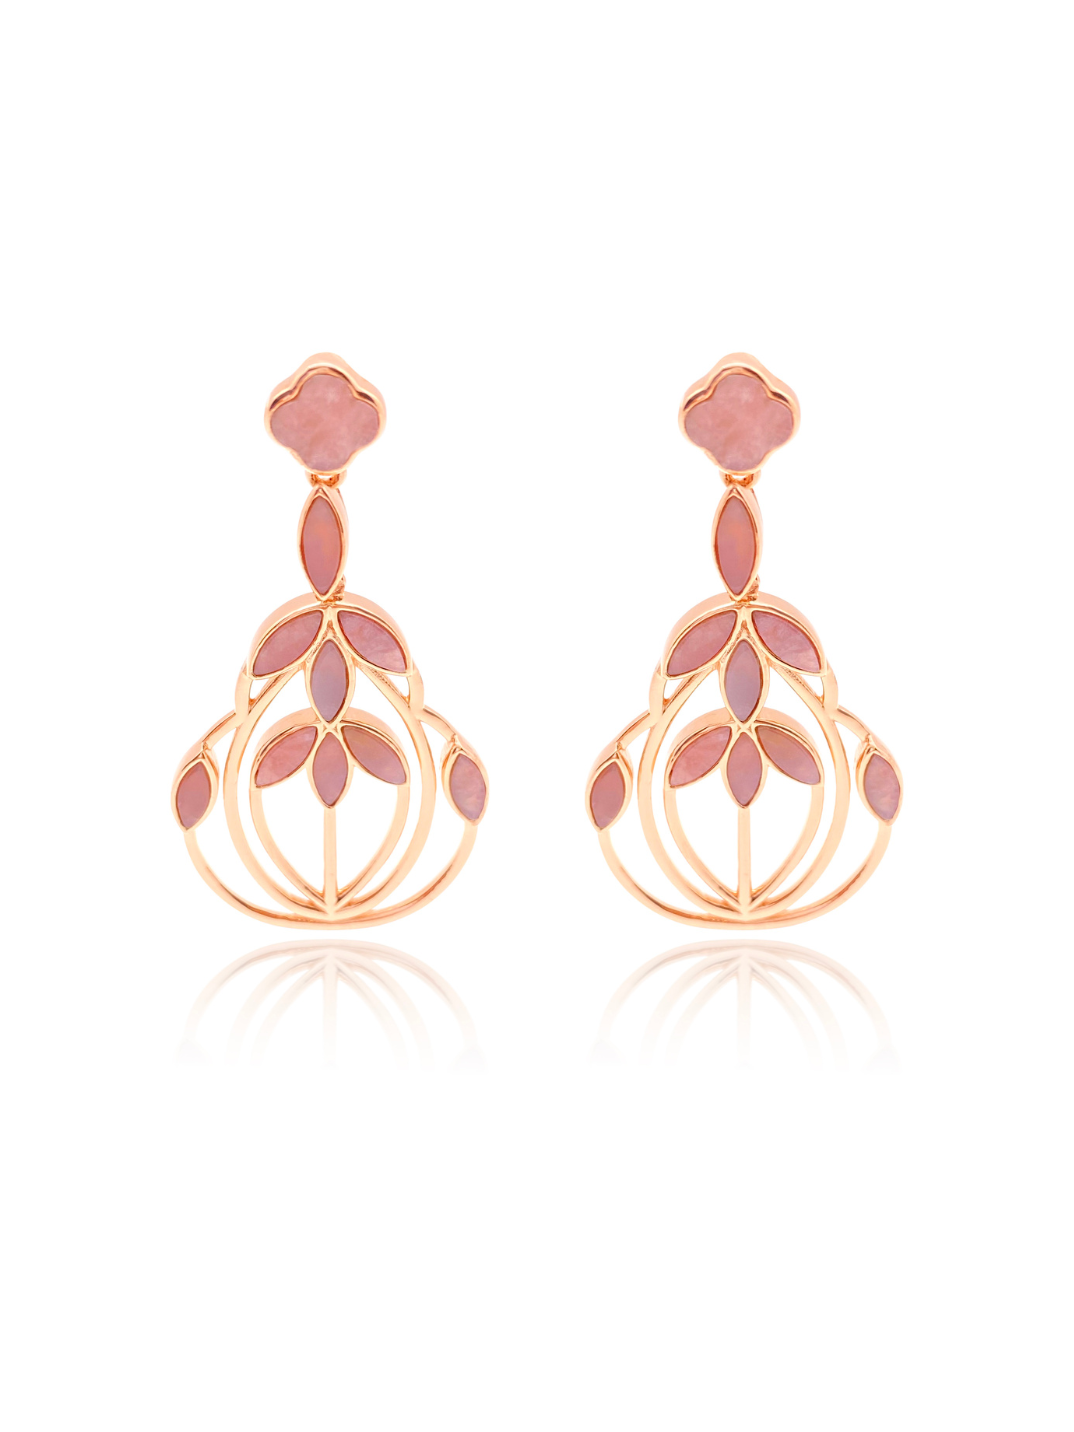 Our teardrop earrings are exceptional made using rose gold vermeil and inlaid with hand cut pink opal. The first design in the floral escape collection it is one of our signature and best selling pieces, versatile to wear from day into night. 